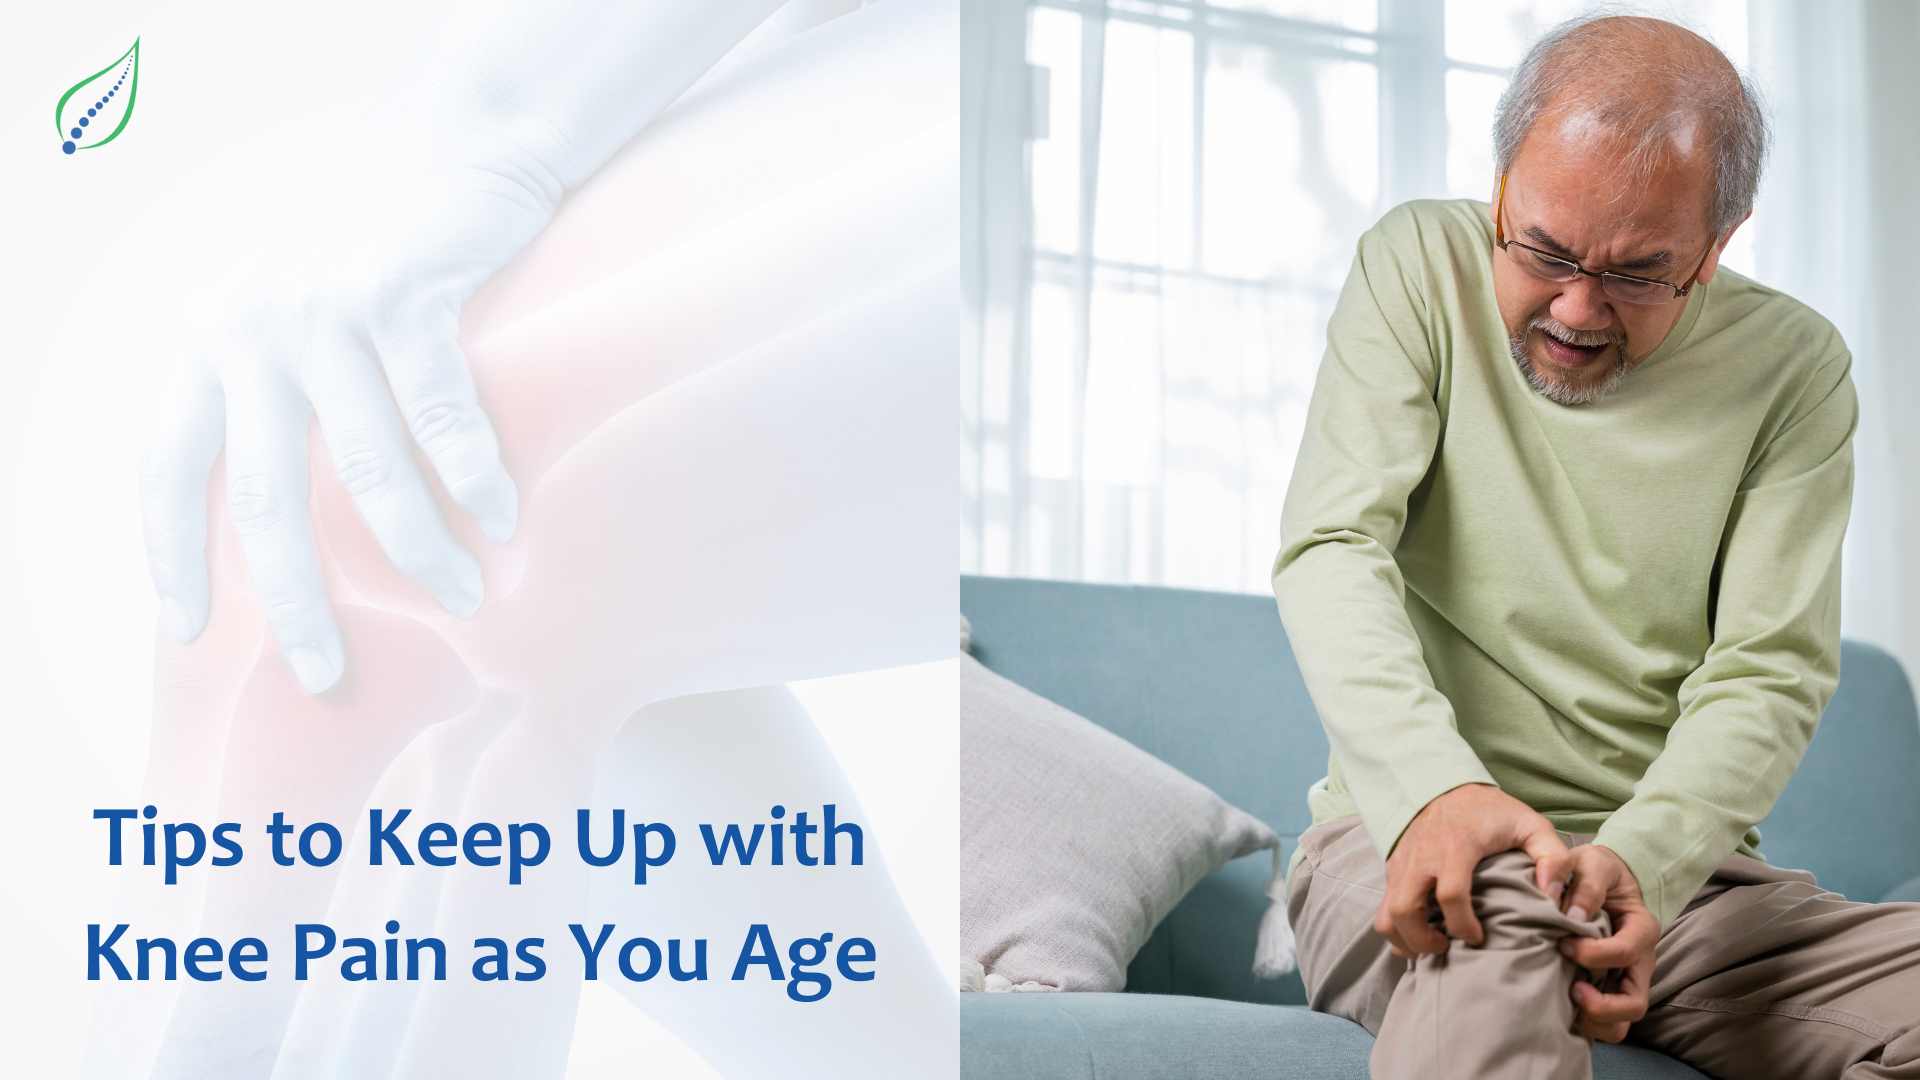 Tips to Keep Up with Knee Pain as You Age